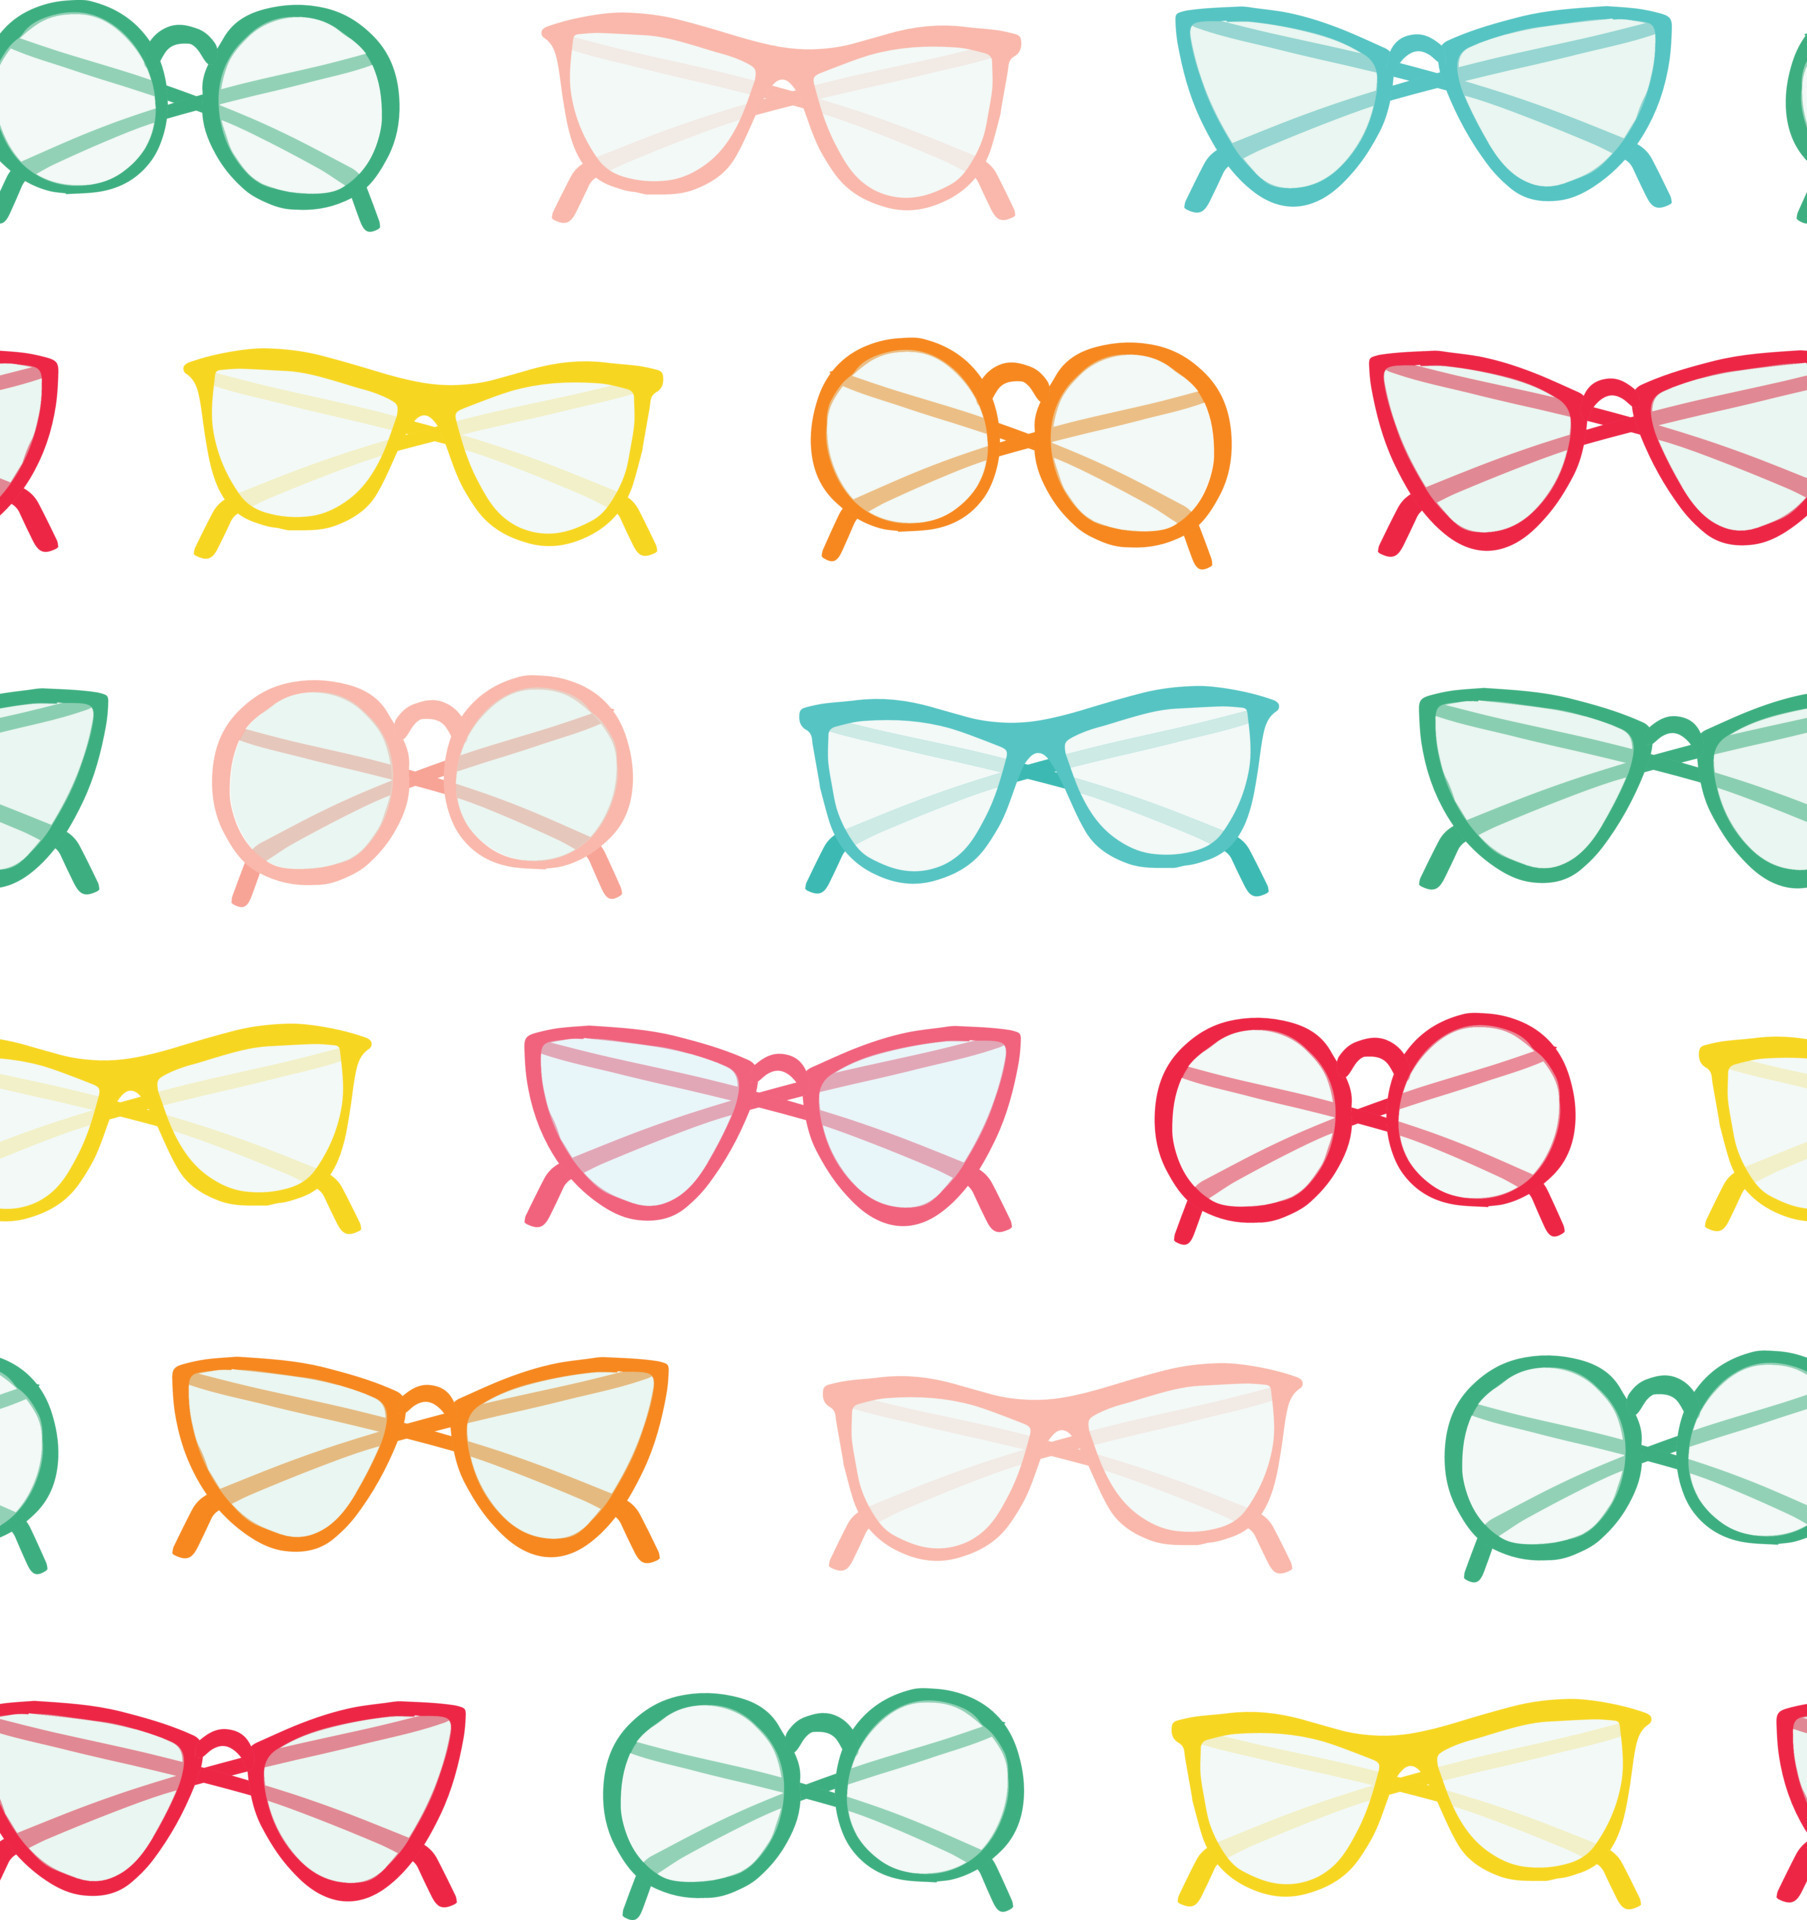 Spectacles Wallpapers - Wallpaper Cave